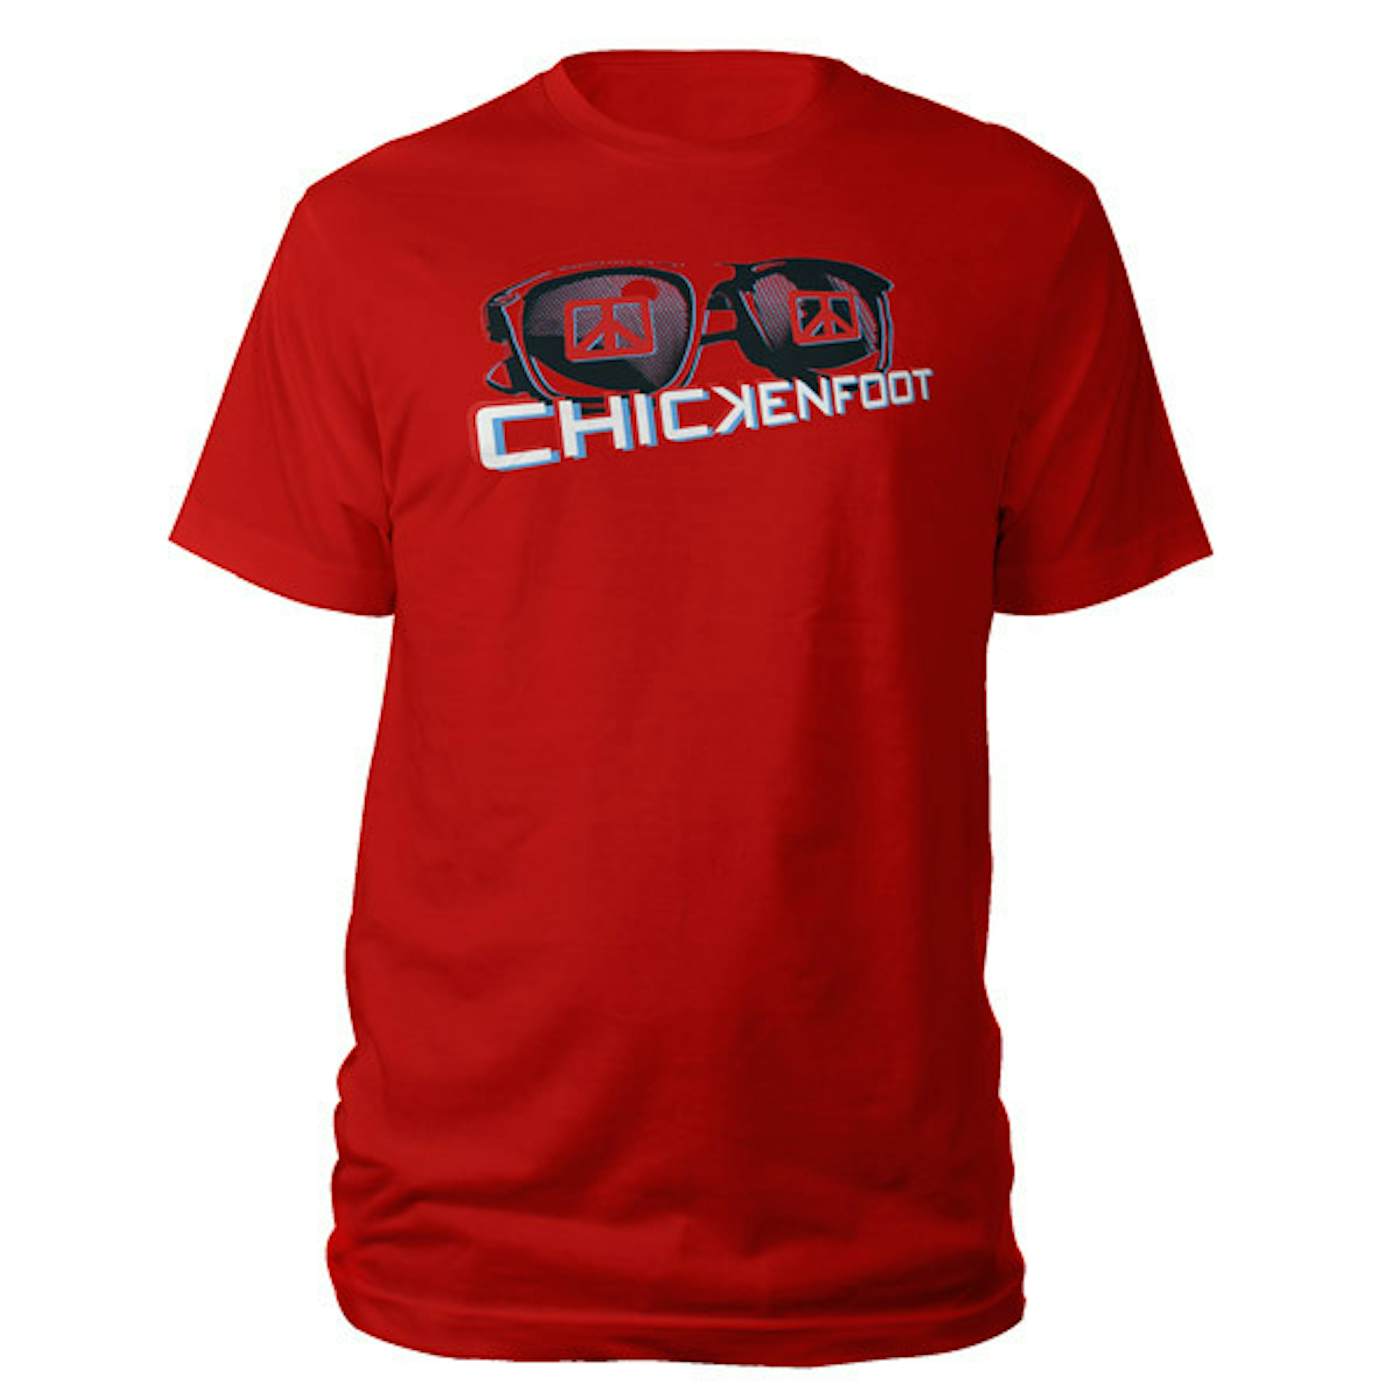 Exclusive - Chickenfoot 3D Glasses Tee